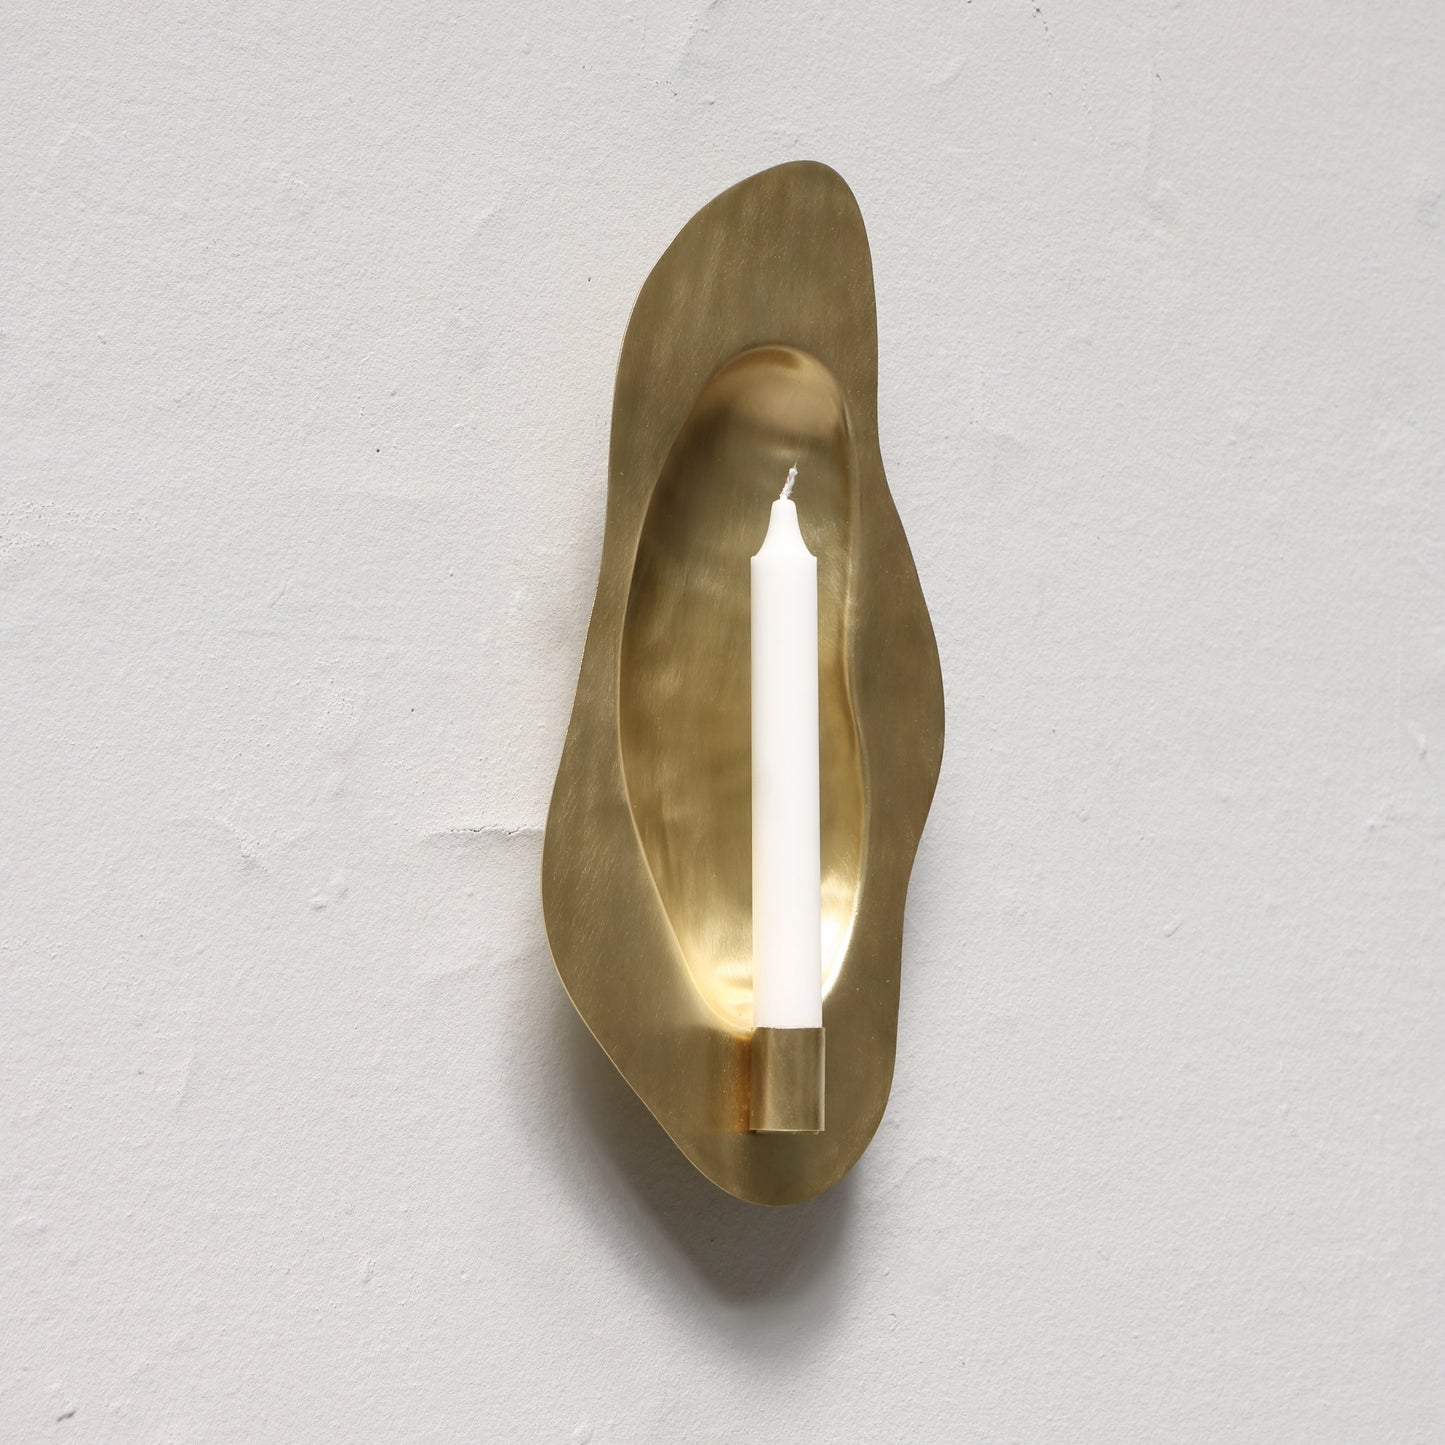 Brass candle holder designed by Christian+Jade Reflecting Flame